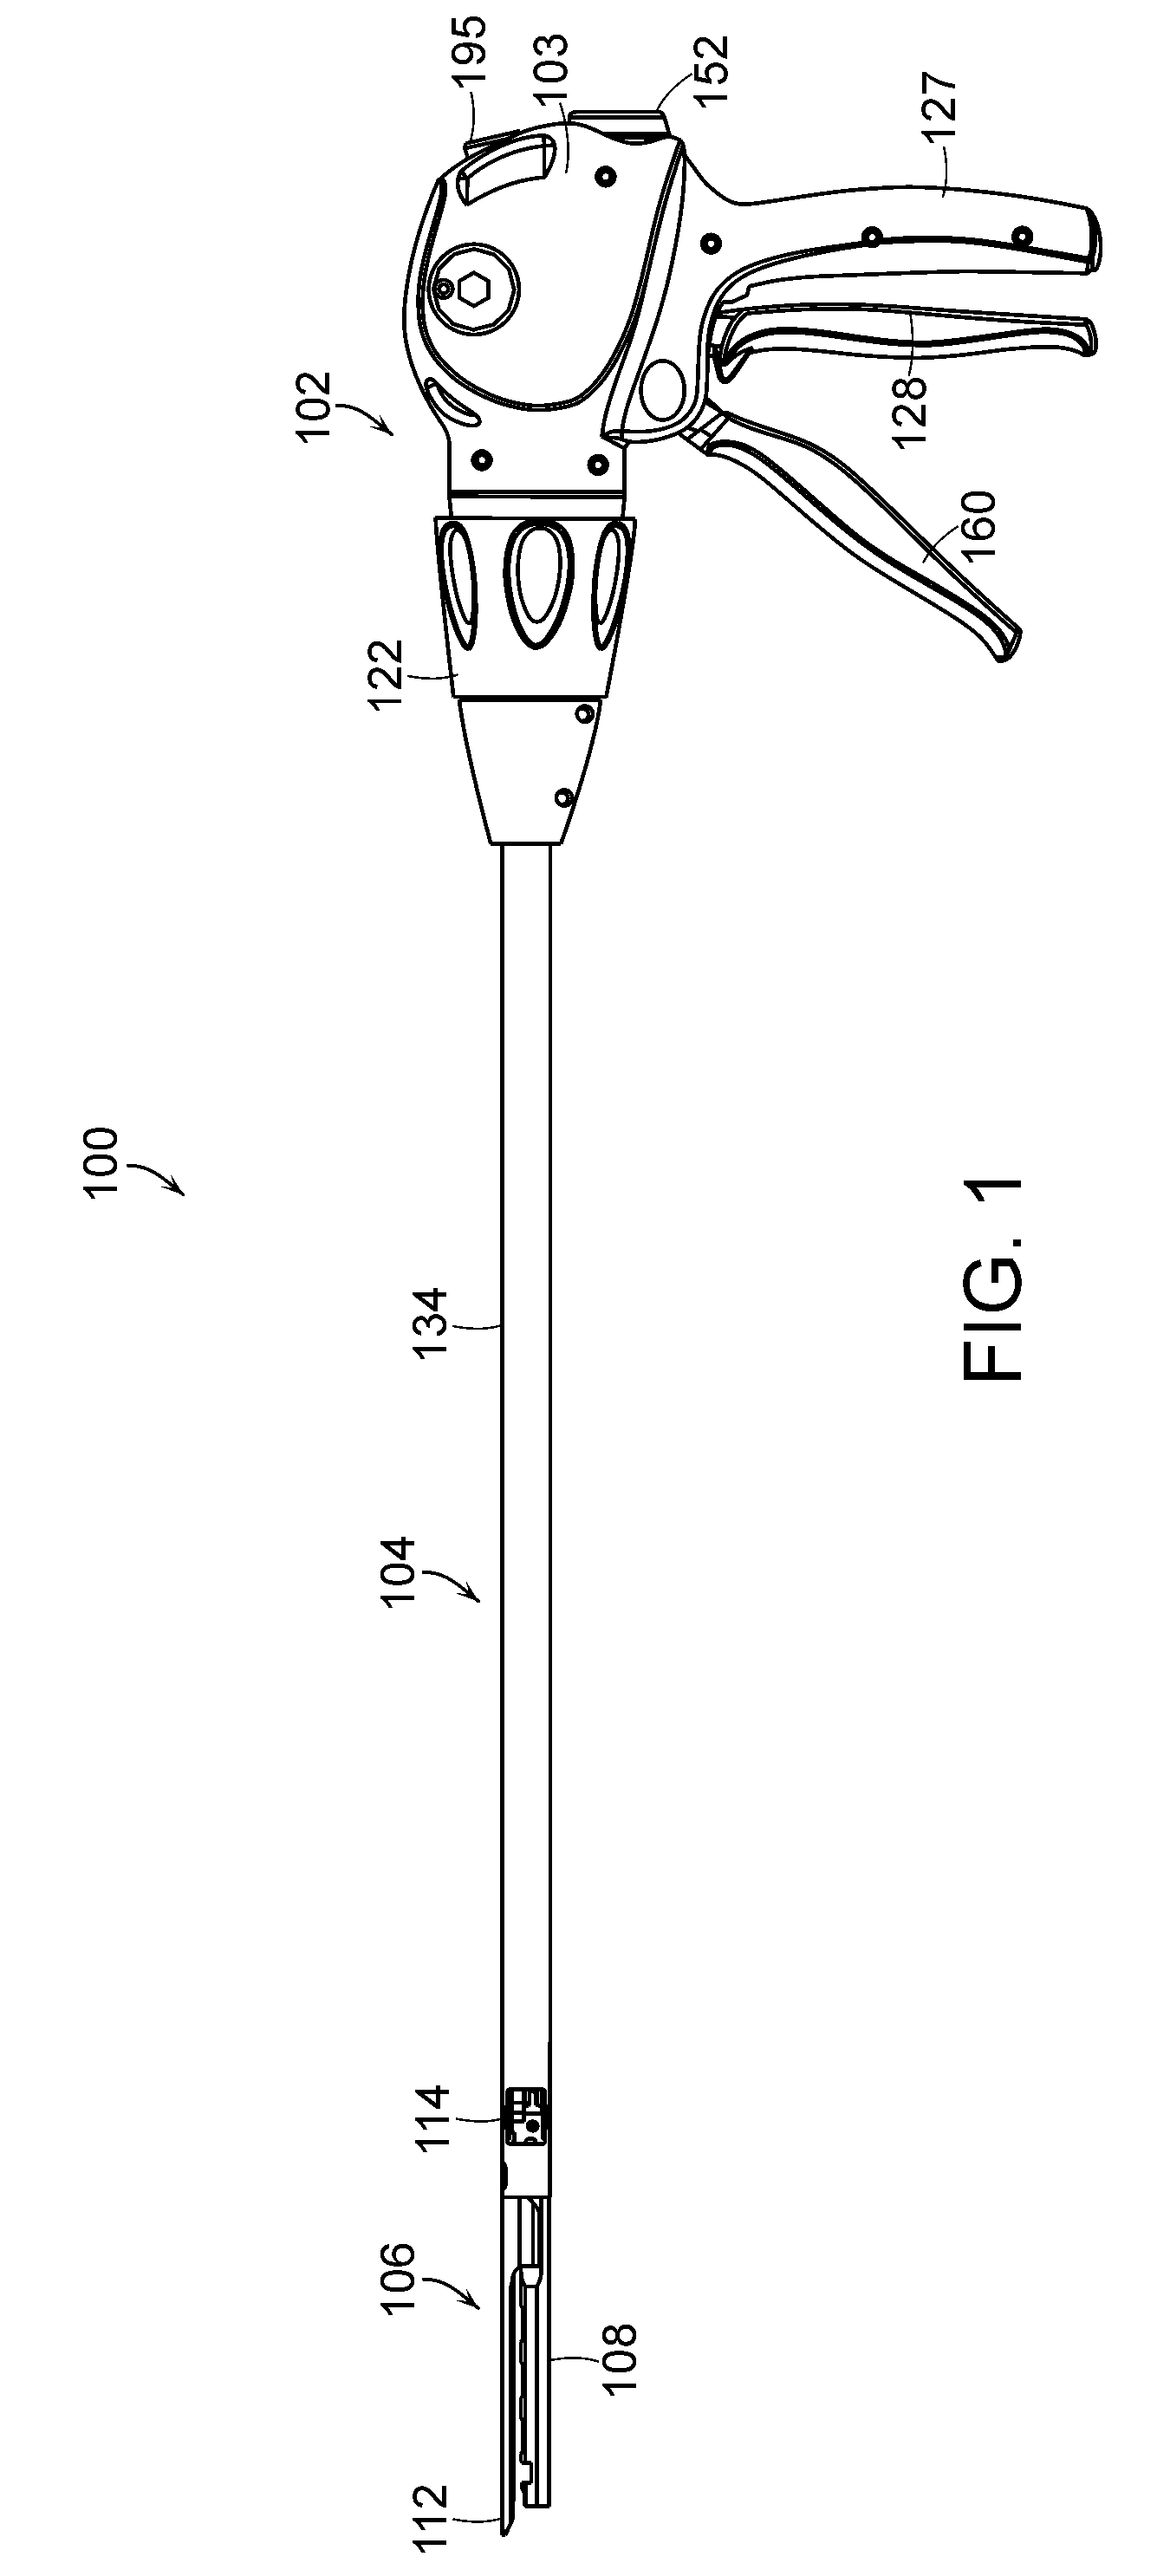 Surgical stapling instrument with a geared return mechanism